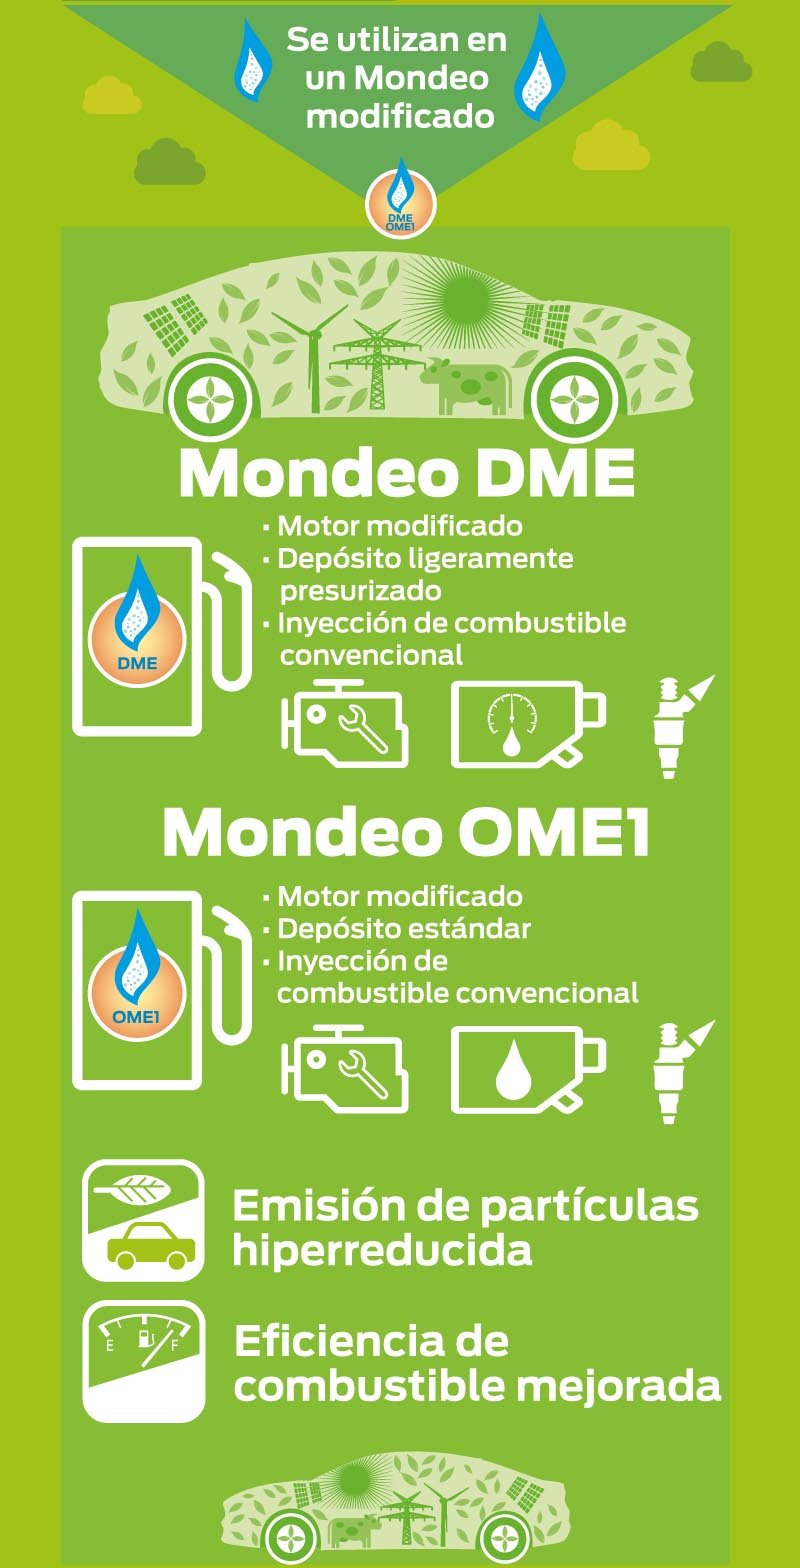 dme_ome_ES_1